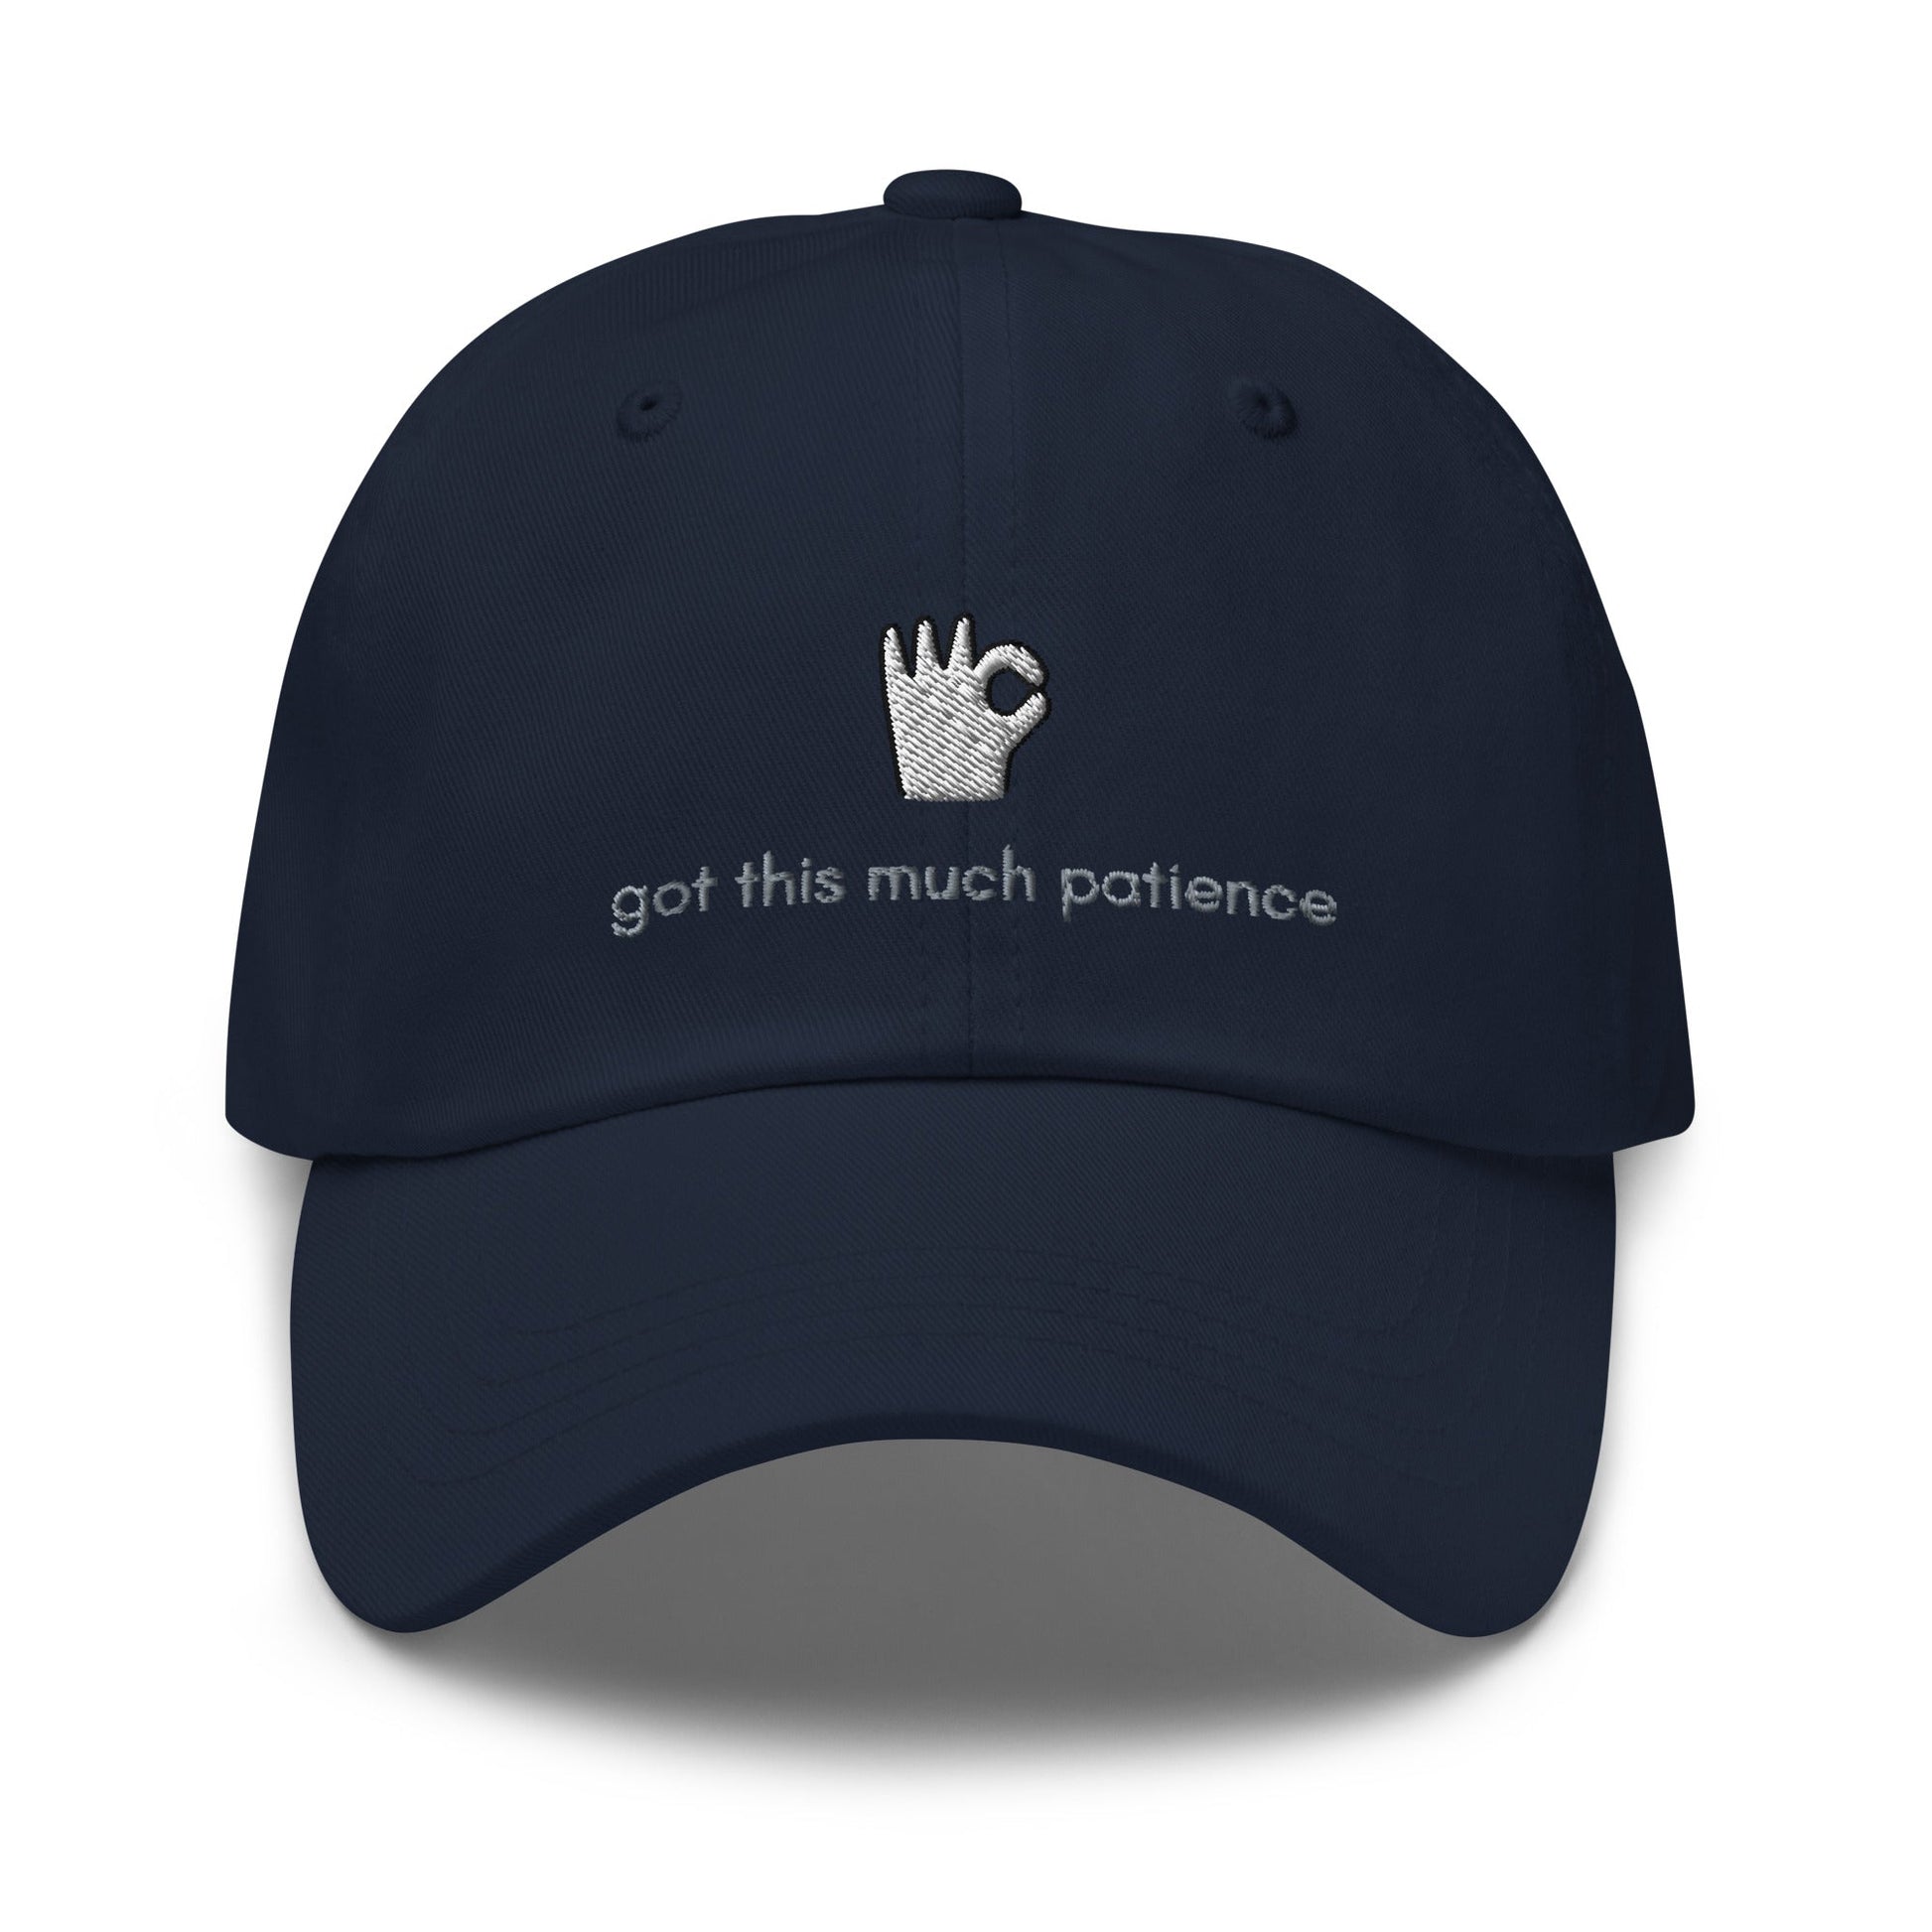 Got This Much Patience Embroidered Dad hat - chucklecouture co.